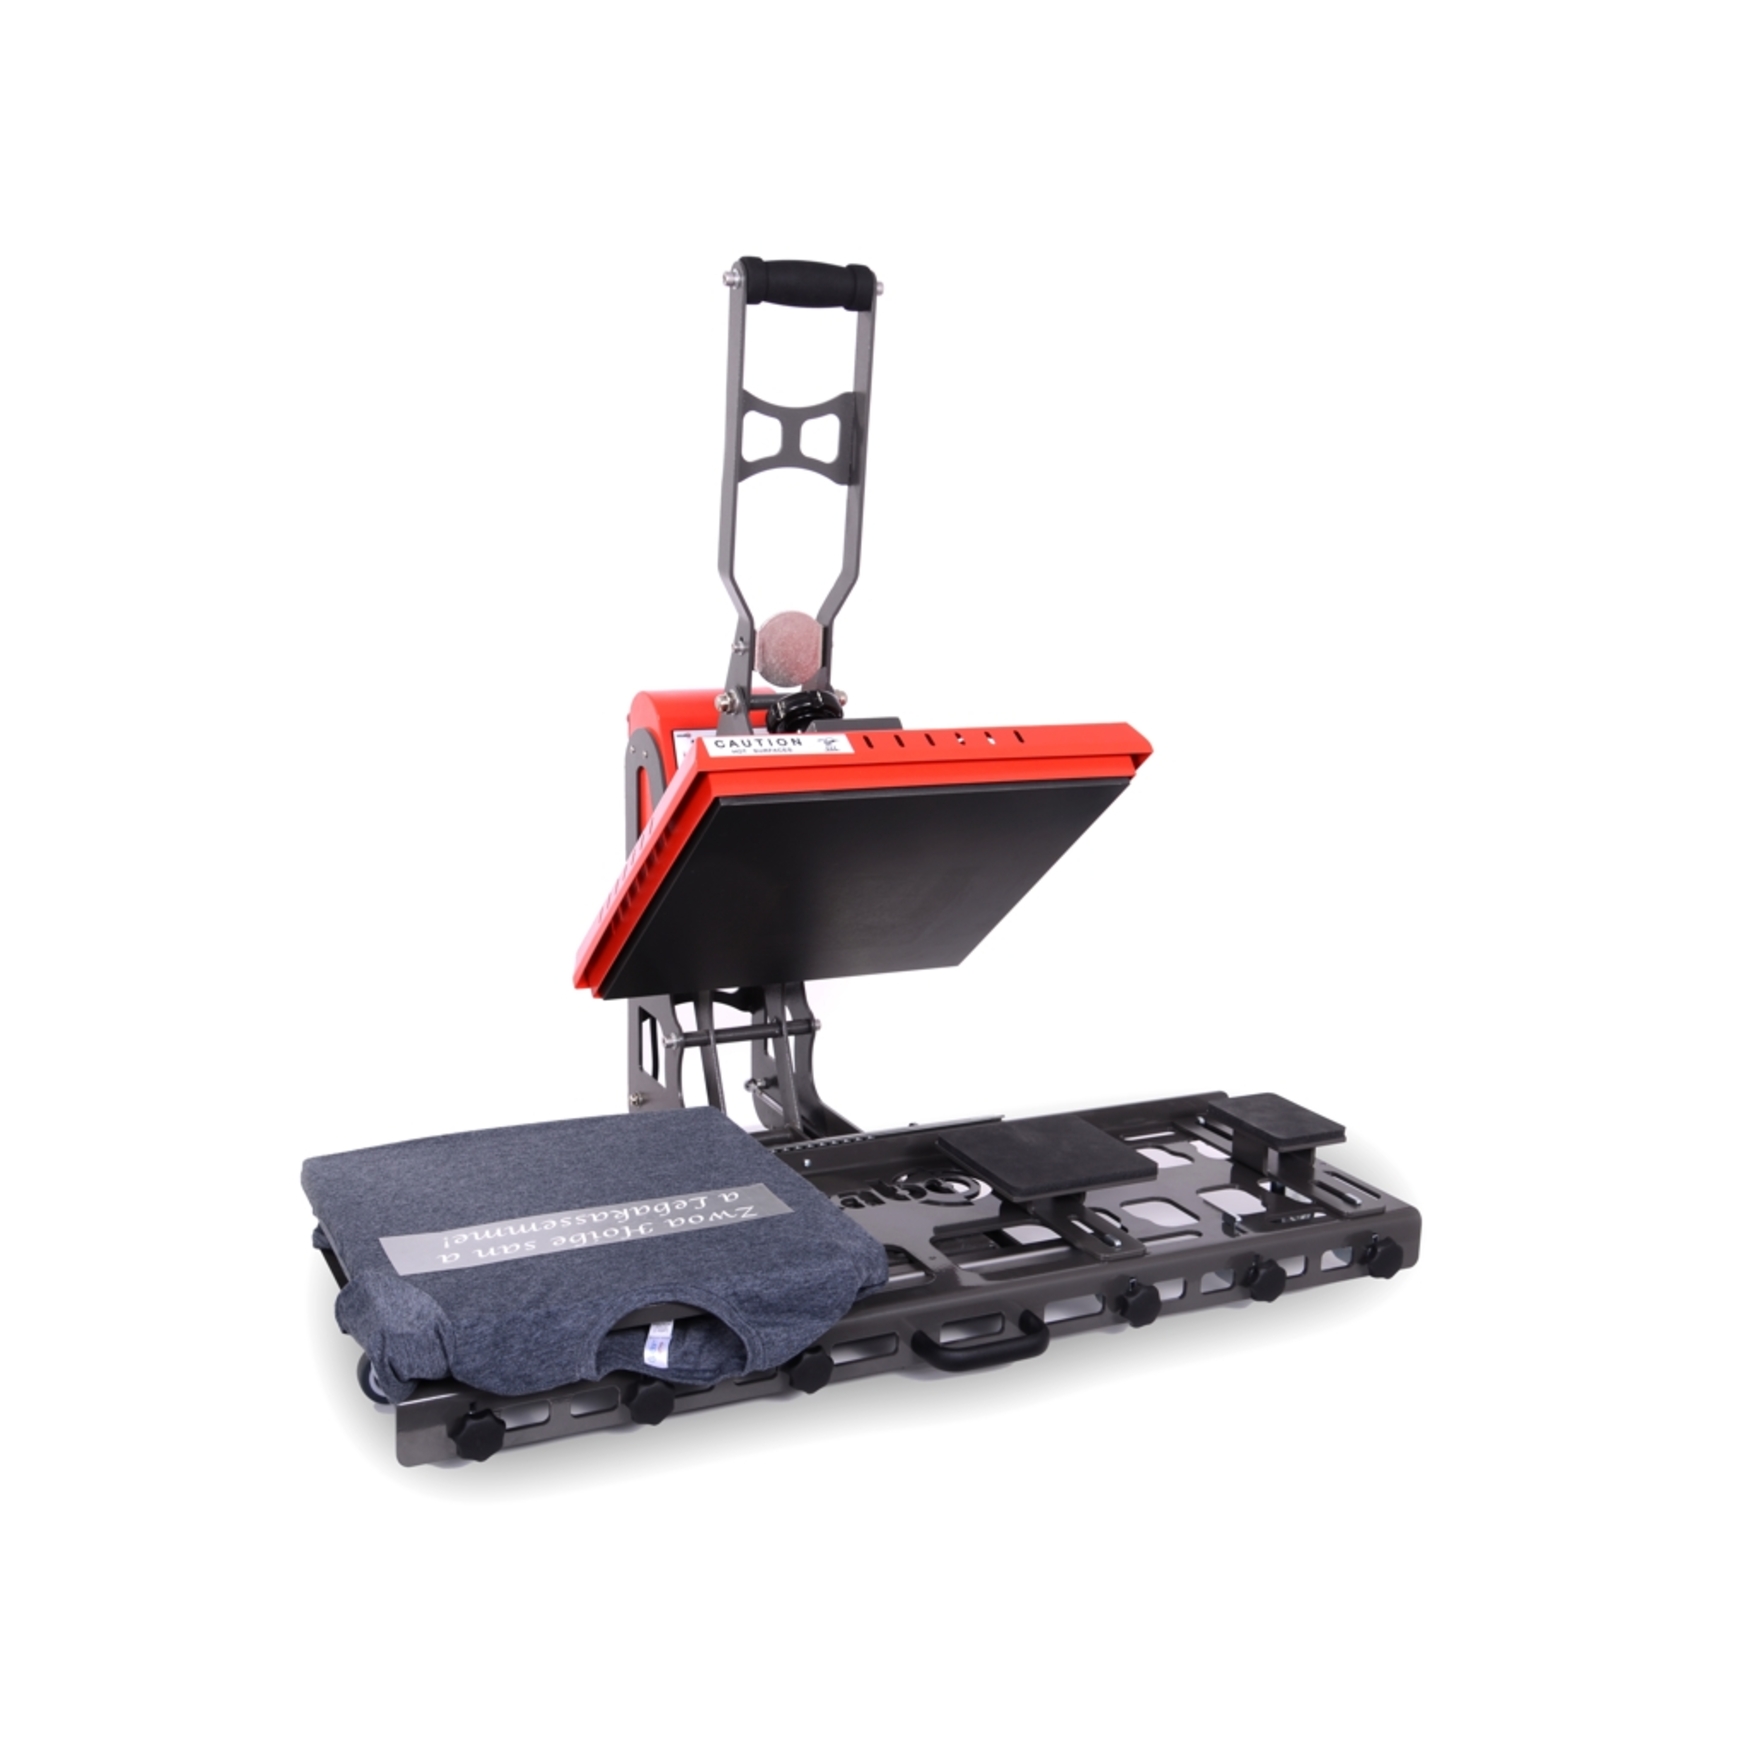 Secabo slide extension for LITE and SMART series incl. 38x38cm base plate with beam adapter